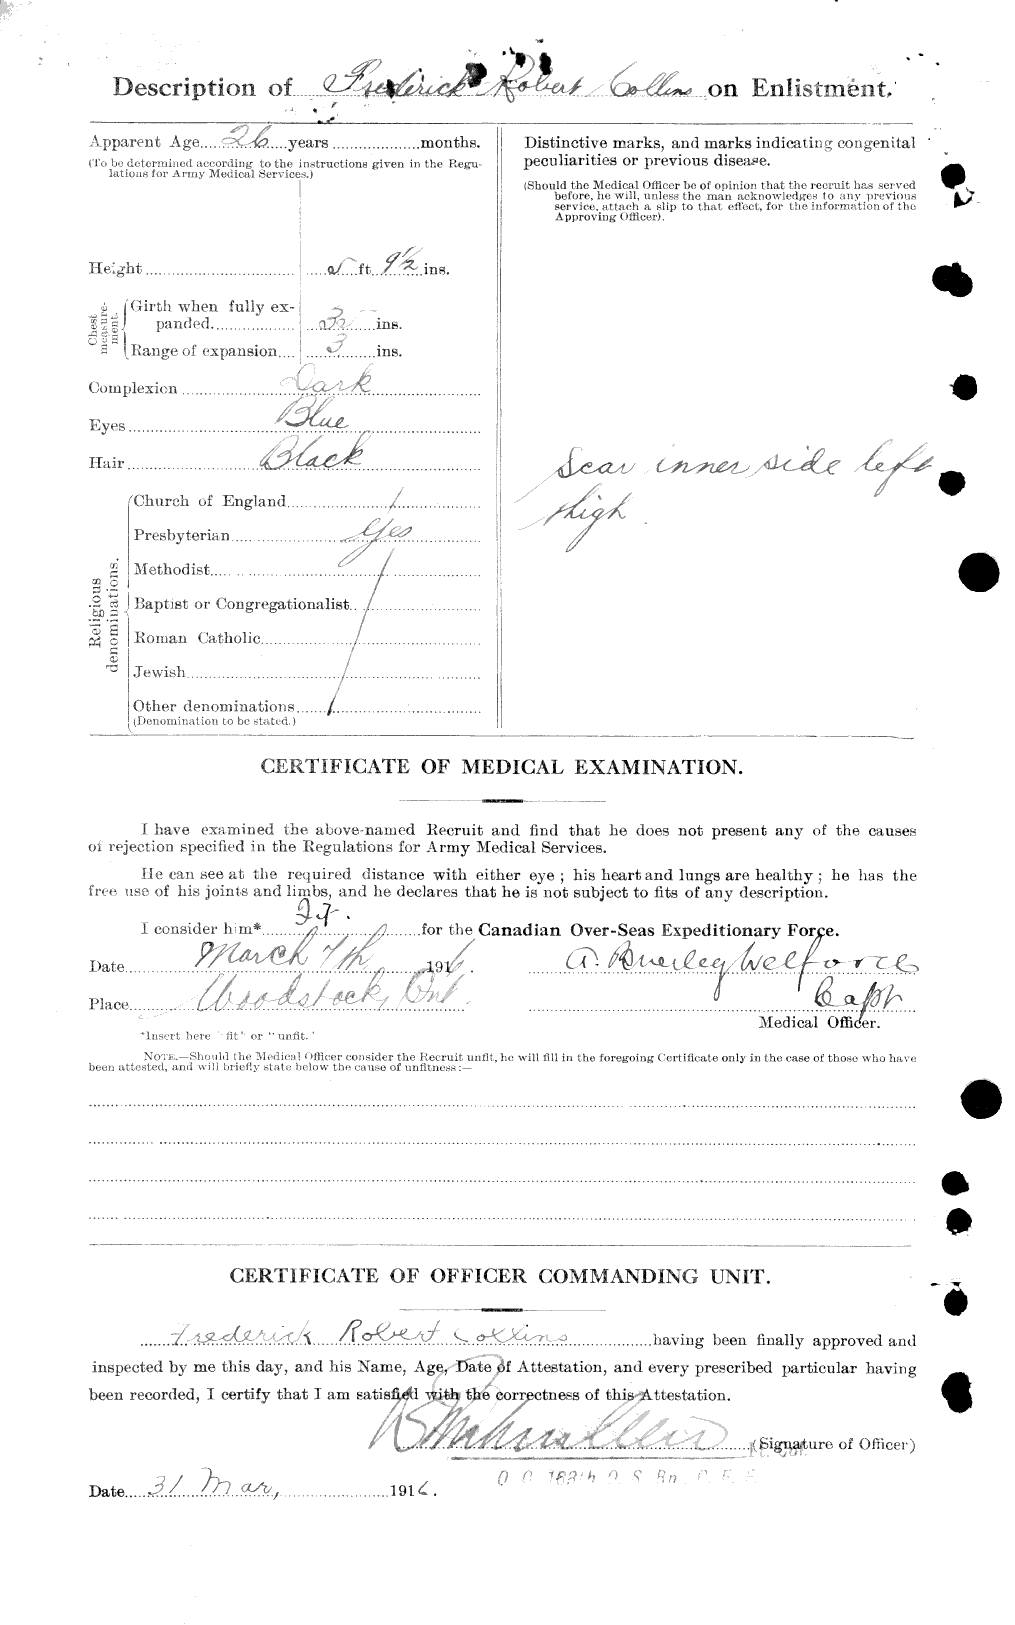 Personnel Records of the First World War - CEF 037838b